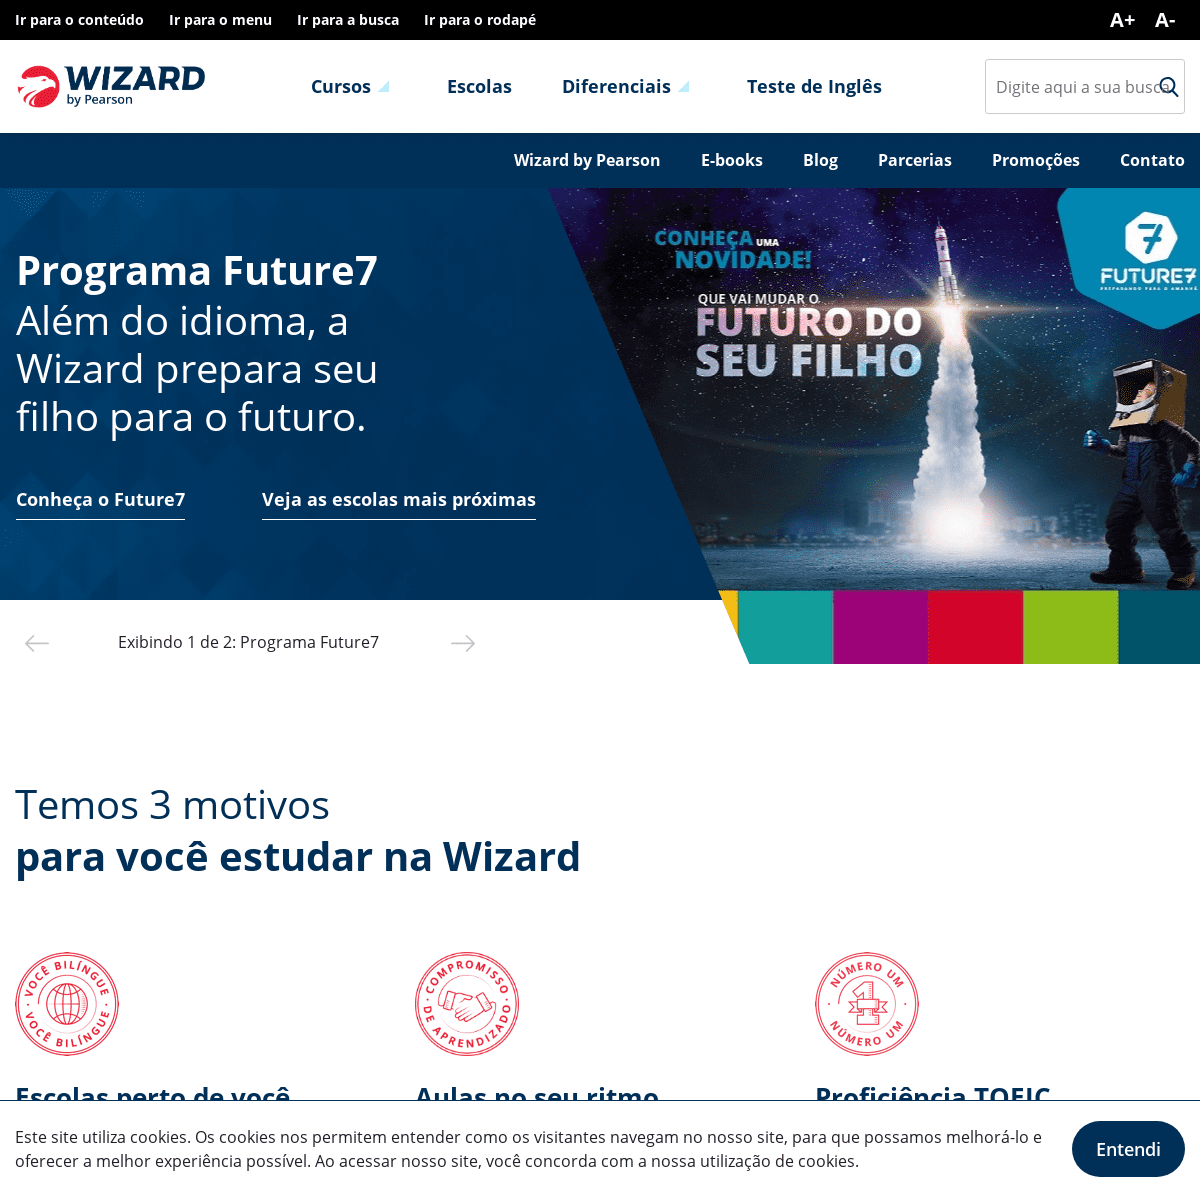 A complete backup of wizard.com.br